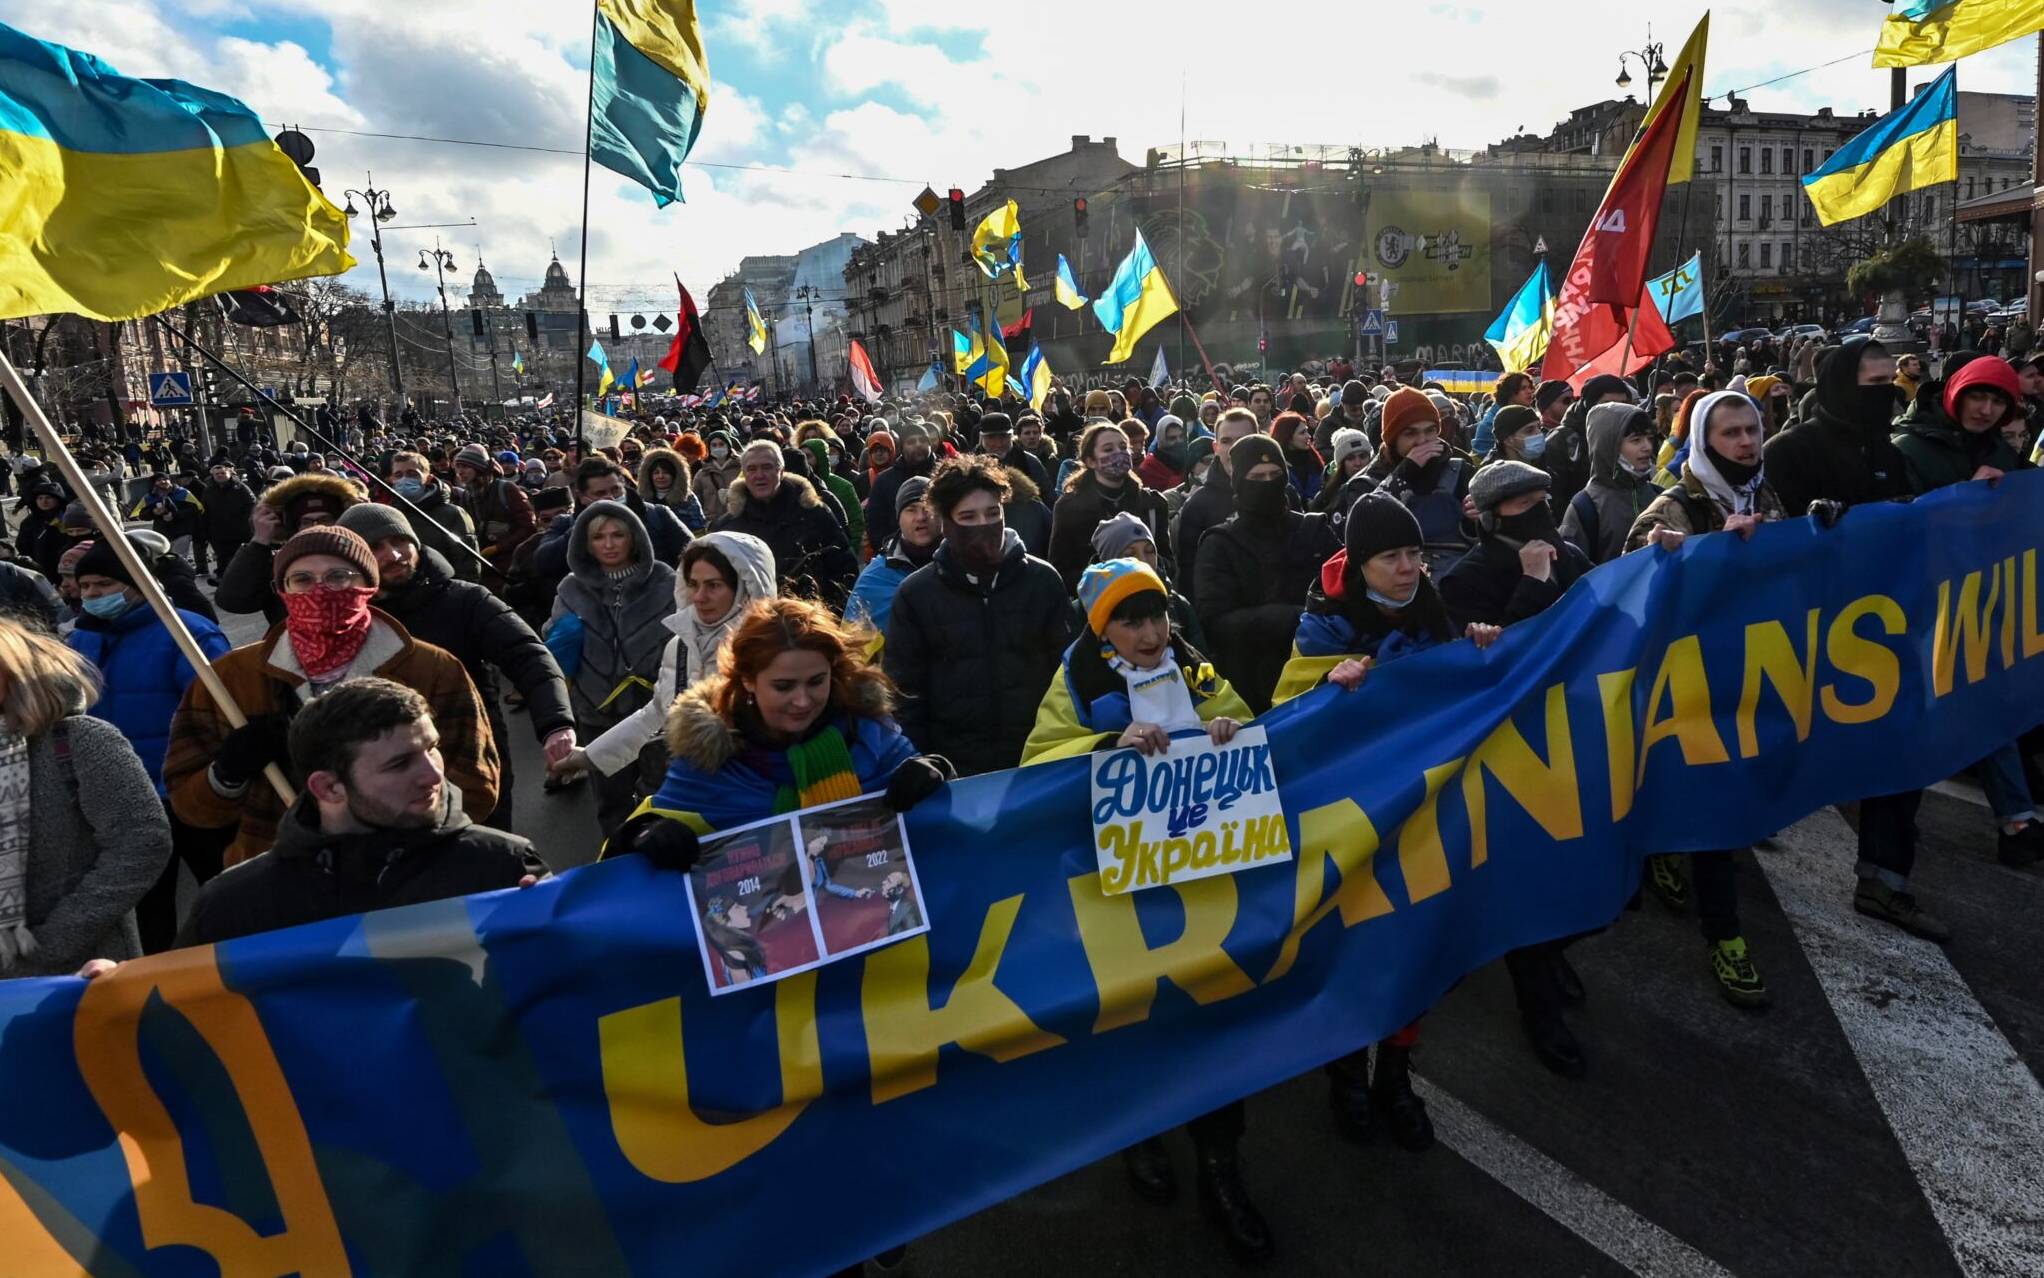 Demonstrators shout slogans as they march behind a banner which reads "Ukrainians will resist" in the colours of the national flag during a rally in Kyiv on February 12, 2022, held to show unity amid US warnings of an imminent Russian invasion. - Ukrainian President Volodymyr Zelensky said that warnings of an imminent Russian attack on his country were stoking "panic" and demanded to see firm proof of a planned invasion. (Photo by Sergei SUPINSKY / AFP)